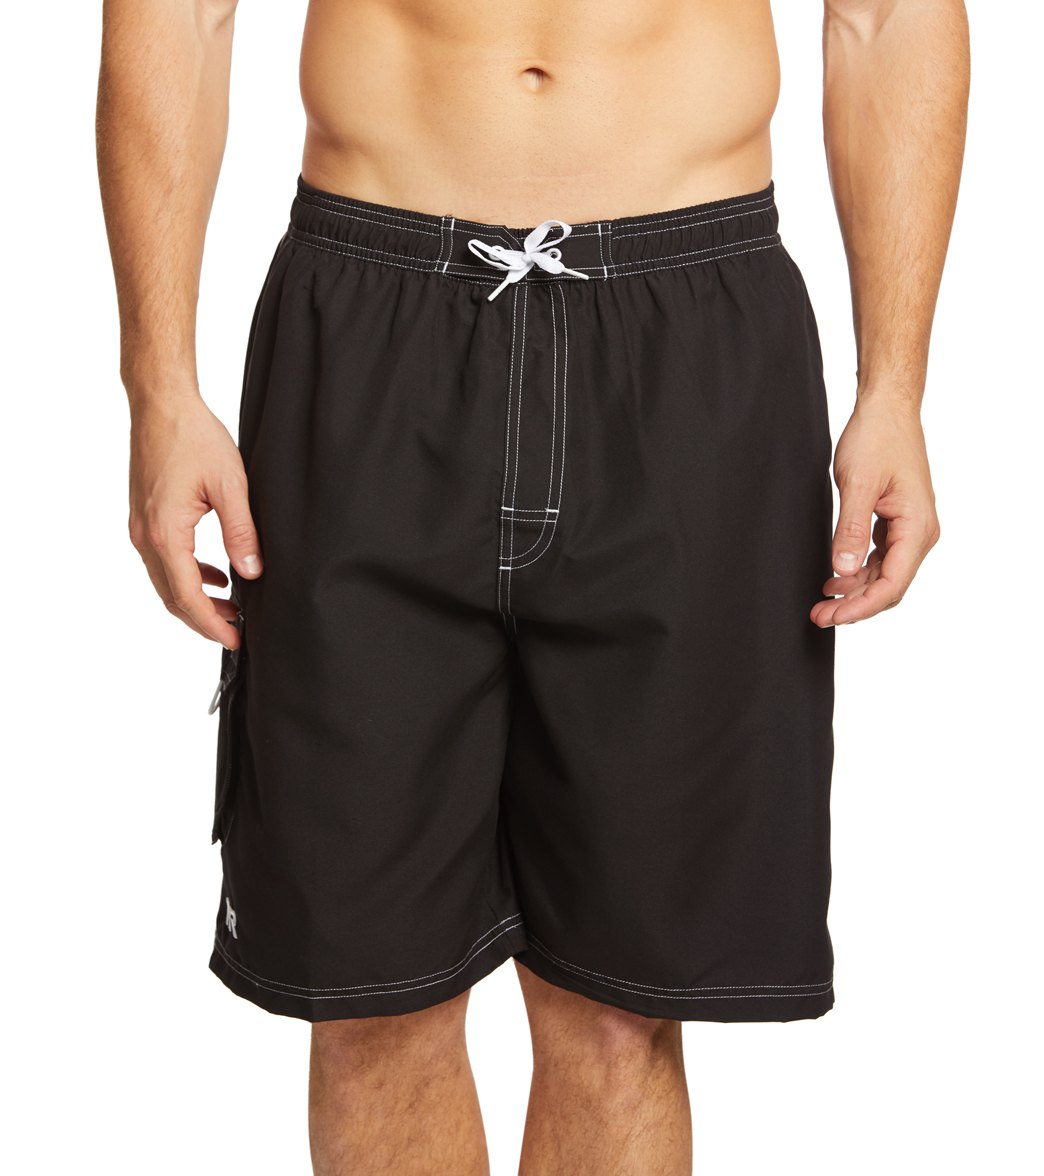 TYR Challenger Swim Trunk at SwimOutlet.com